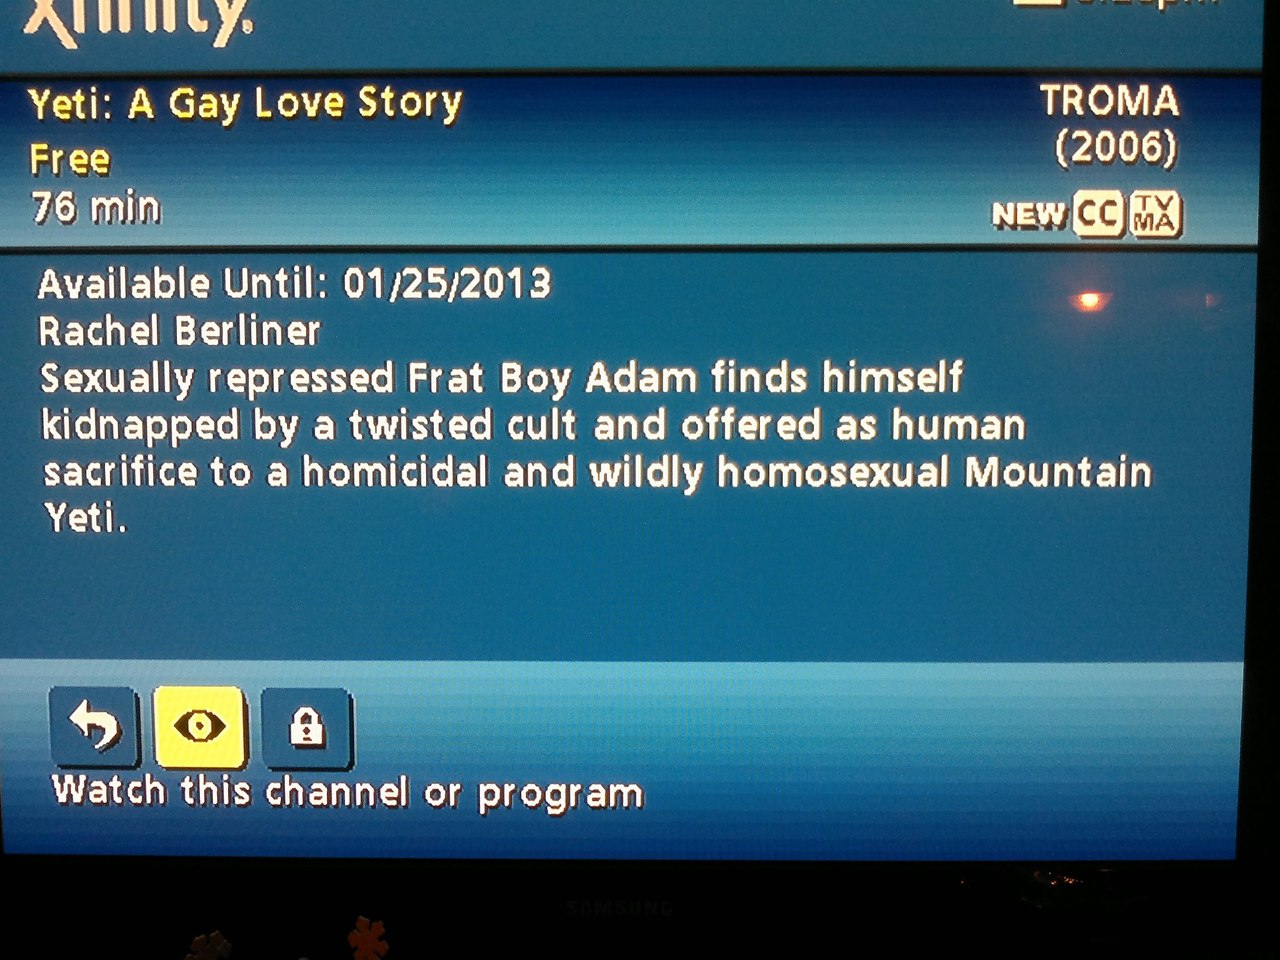 Not Just Gay, "Wildly" Homosexual